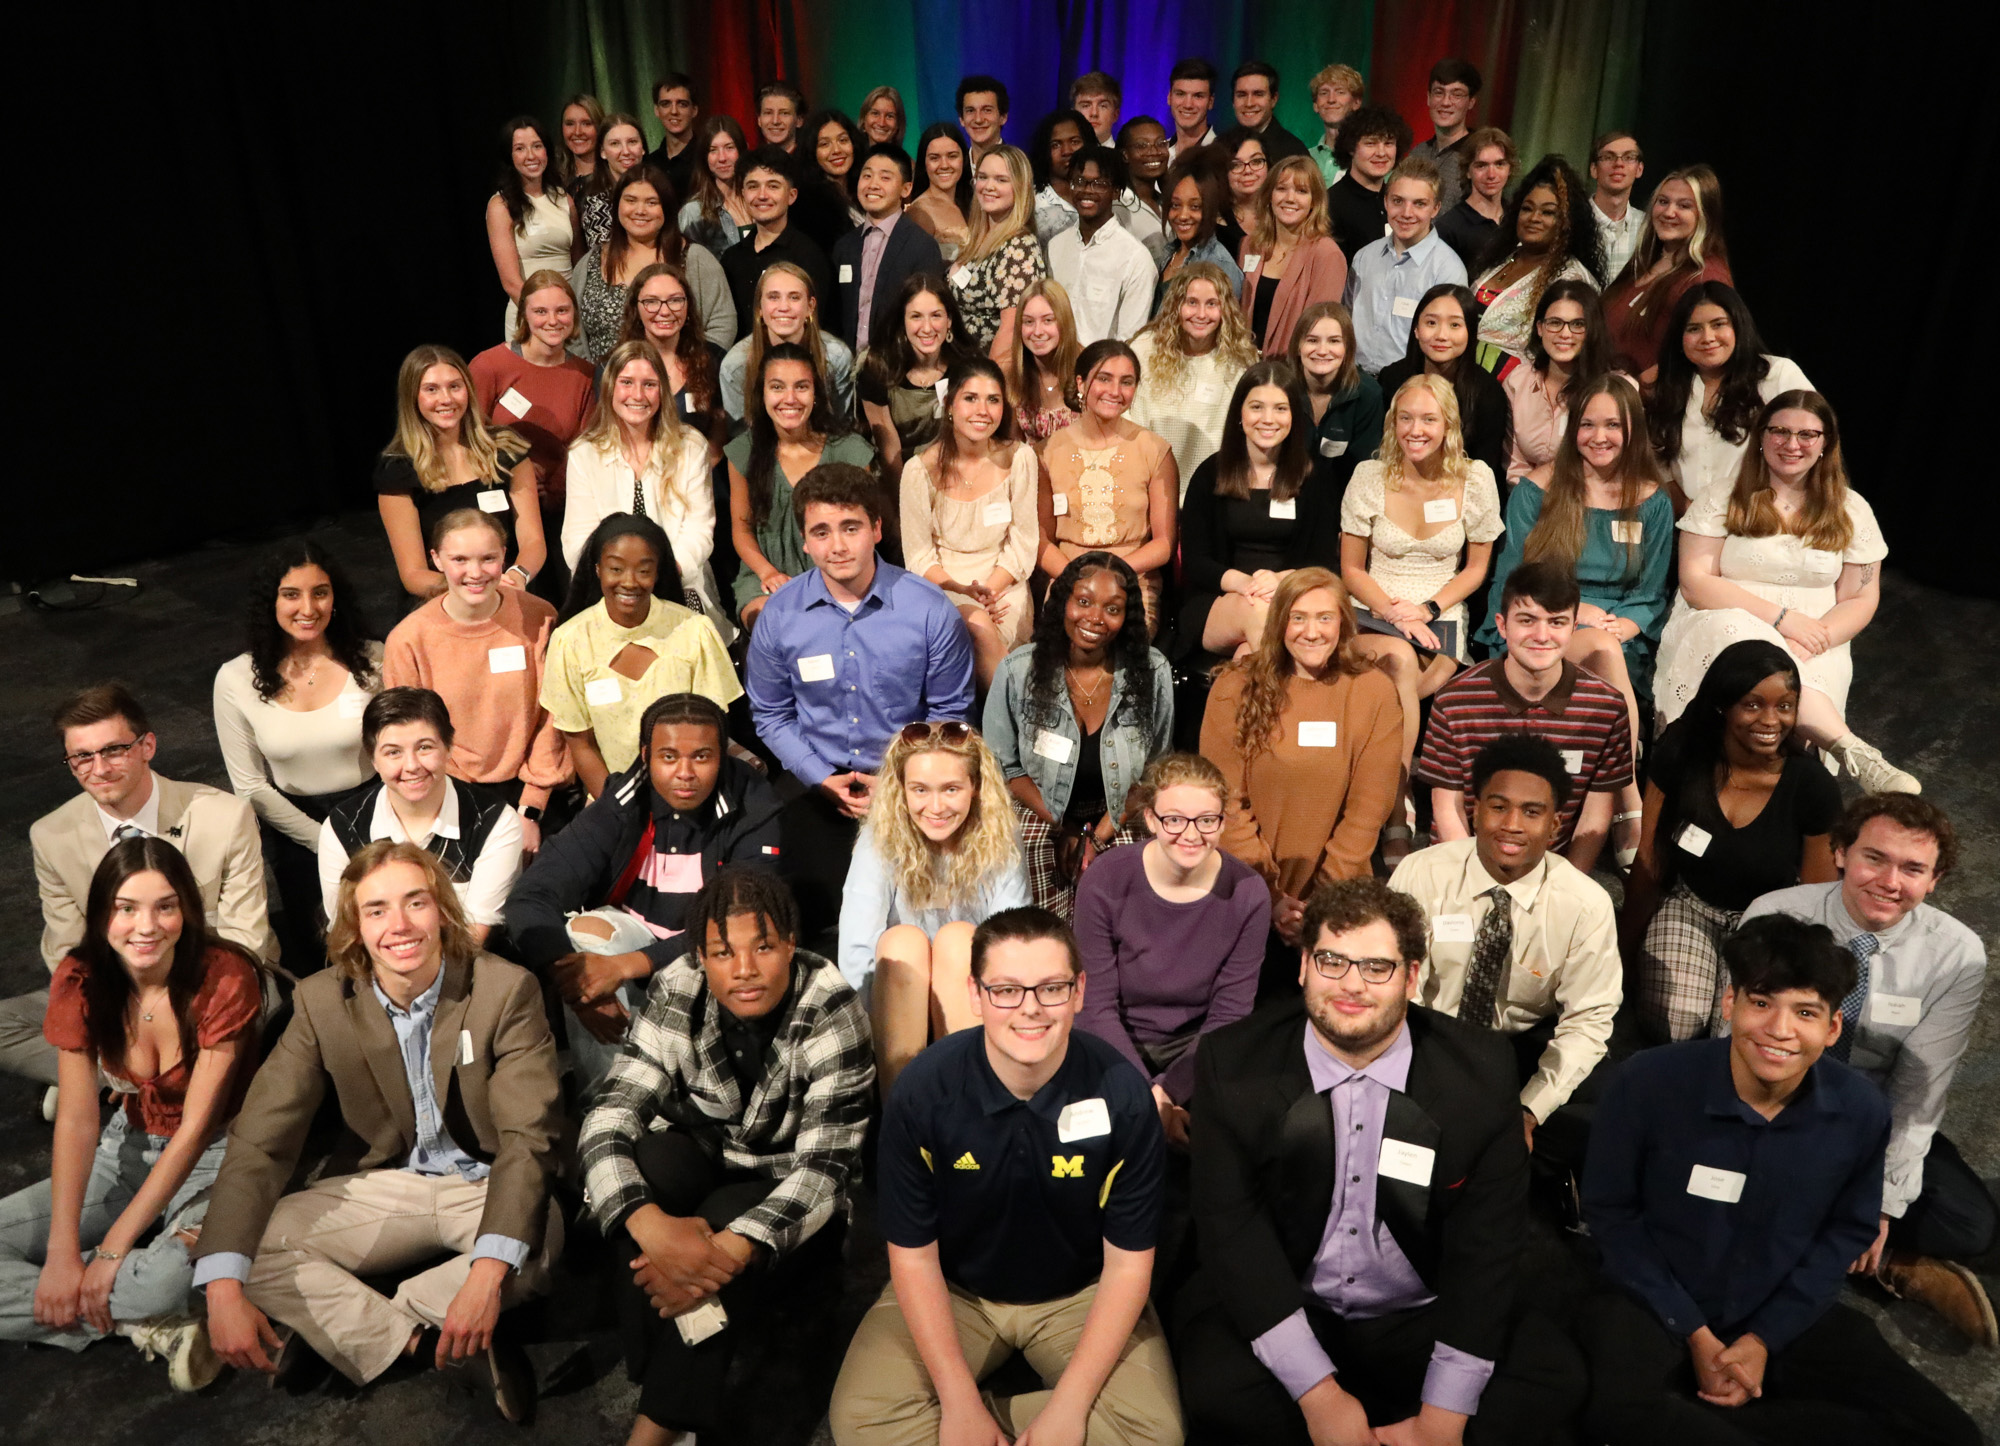 A group photo of 70 students who received scholarships from Berrien Community Foundation.